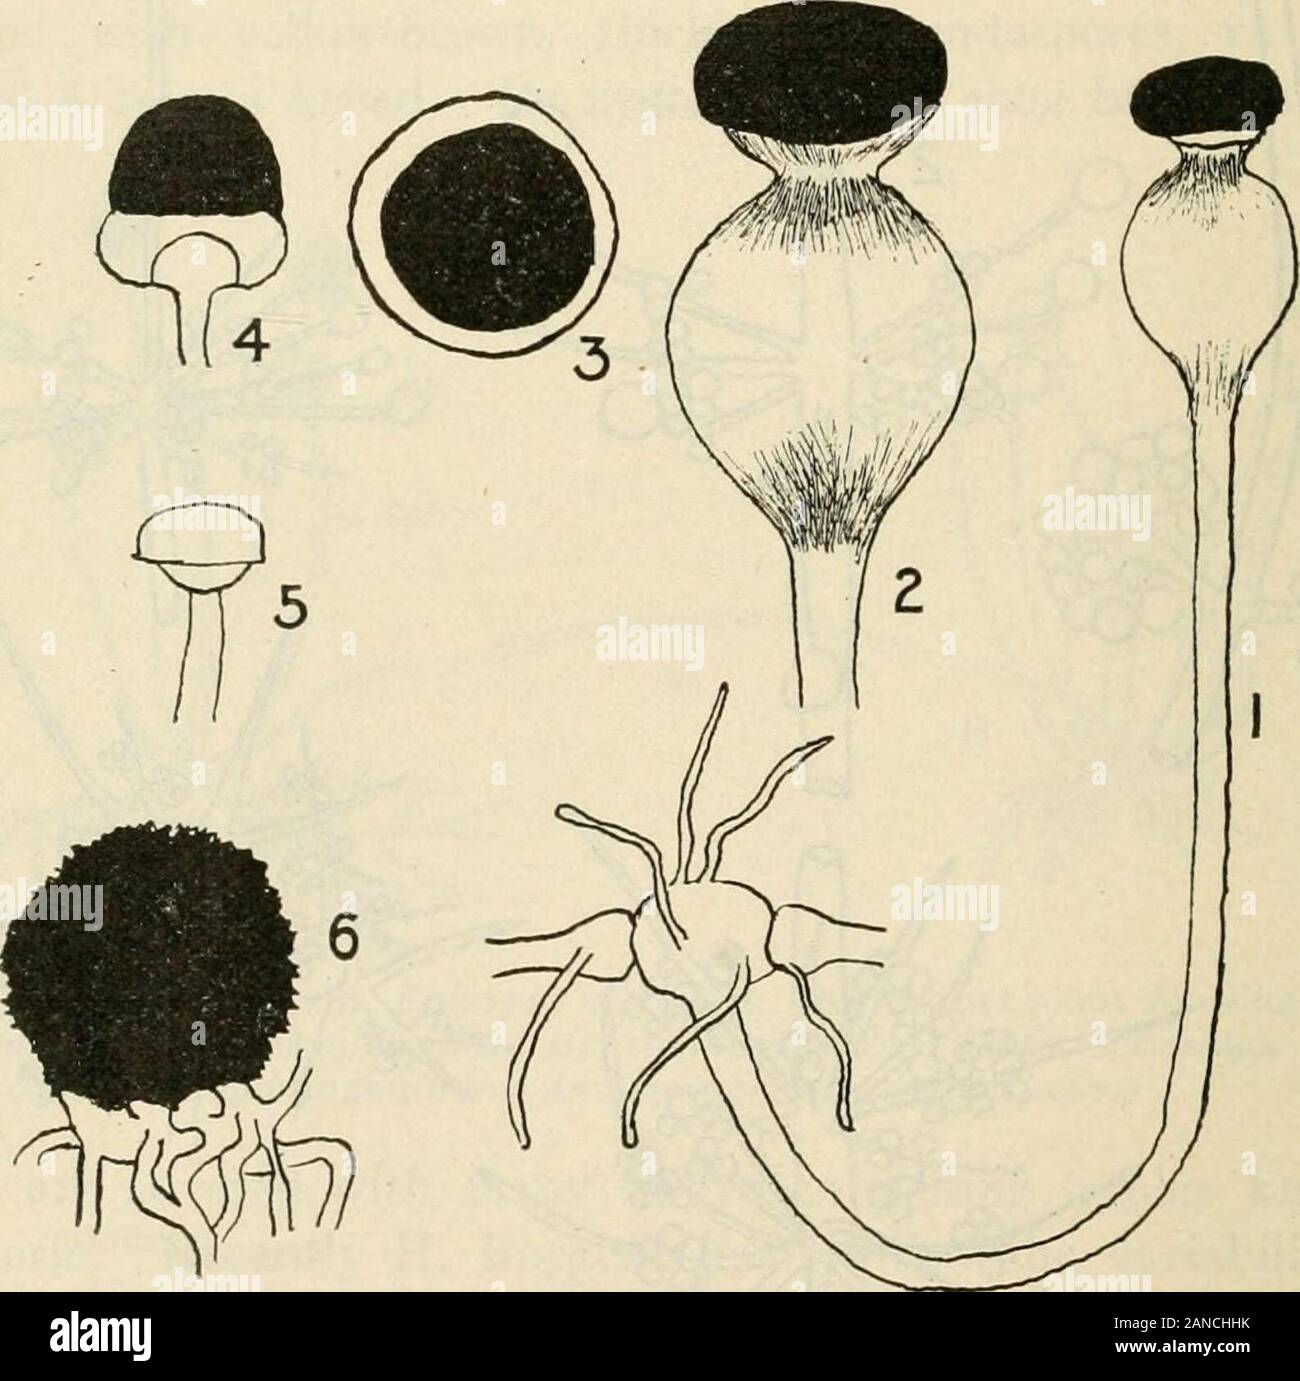 A text-book of mycology and plant pathology . Fig. 32.- -Sporangia of i, Thamnidium elegans; 2, 3, 4, Thamnidiutn chcetocladioides;5, Chalocladium Jonesii. {After Brefeld.) families (Fig. 28) AcARiCACEiE, Boletace^, Clavariace.e and Hy-DNACE^. Its sporangiophores i to 3 cm. high are finally brown in colorand dichotomously branched. The sporangia are spheric with a deli- I02 MYCOLOGY cate sporangial wall, wliich soon disappears leaving the spores on ahemispheric columella. These spores are ii to yoju broad. The ^oofj,broad zygospores are produced from similar branches of a dichotomouslybranched Stock Photo